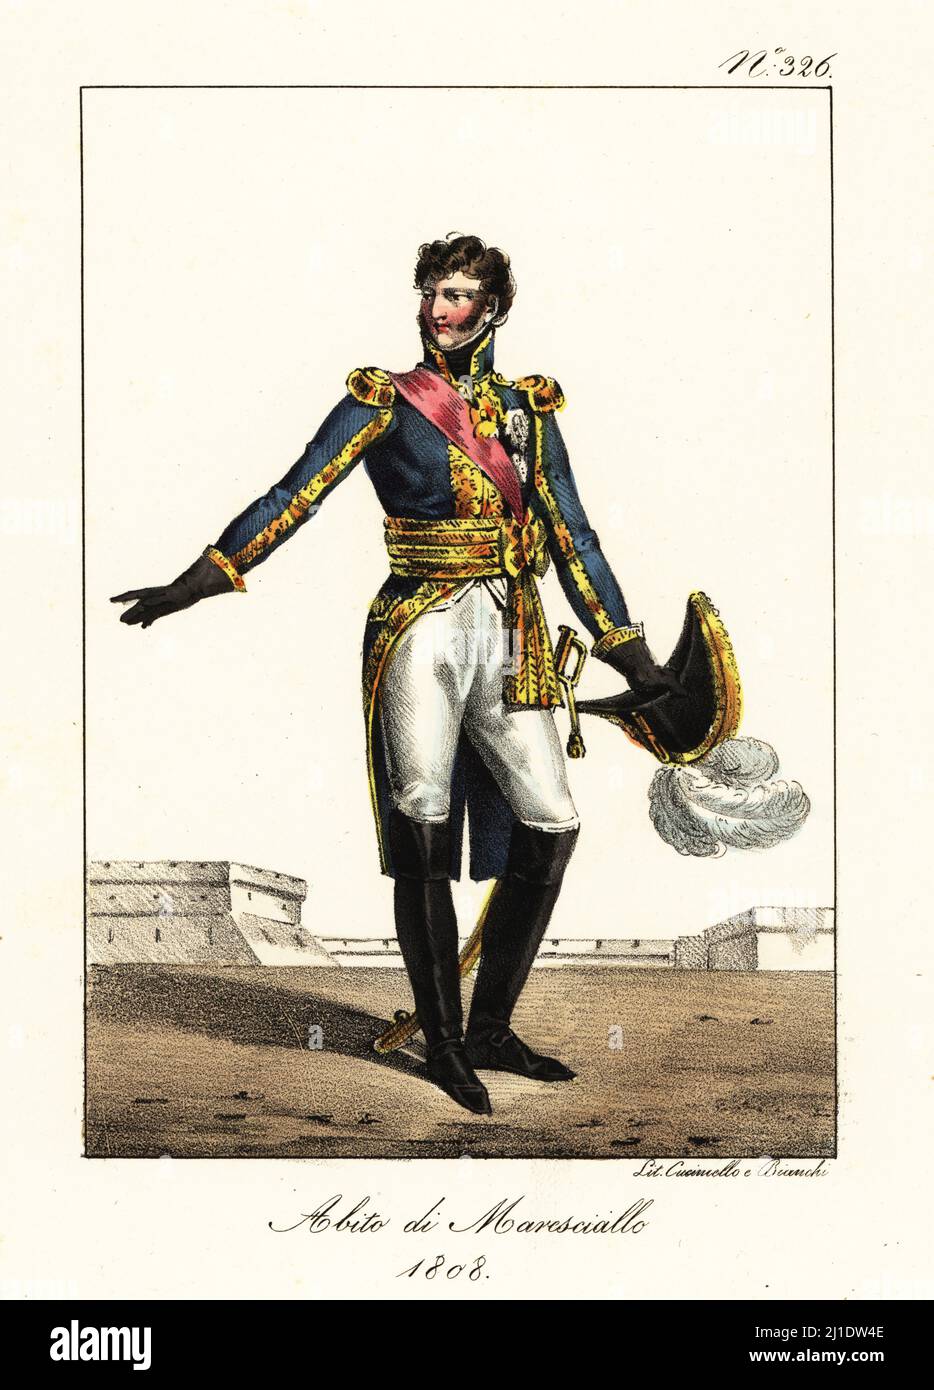 Ceremonial costume of a Marshal of the Empire, Napoleonic era, 1808. Bicorne with plumes, blue coat with gold epaulettes and embroidery, red sash, gold belt, breeches and boots, court sword. Costume de Marechal d'Empire, 1808, designed by artist Jean-Baptiste Isabey and designer Charles Percier. Handcoloured lithograph by Lorenzo Bianchi and Domenico Cuciniello after Hippolyte Lecomte from Costumi civili e militari della monarchia francese dal 1200 al 1820, Naples, 1825. Italian edition of Lecomte’s Civilian and military costumes of the French monarchy from 1200 to 1820. Stock Photo